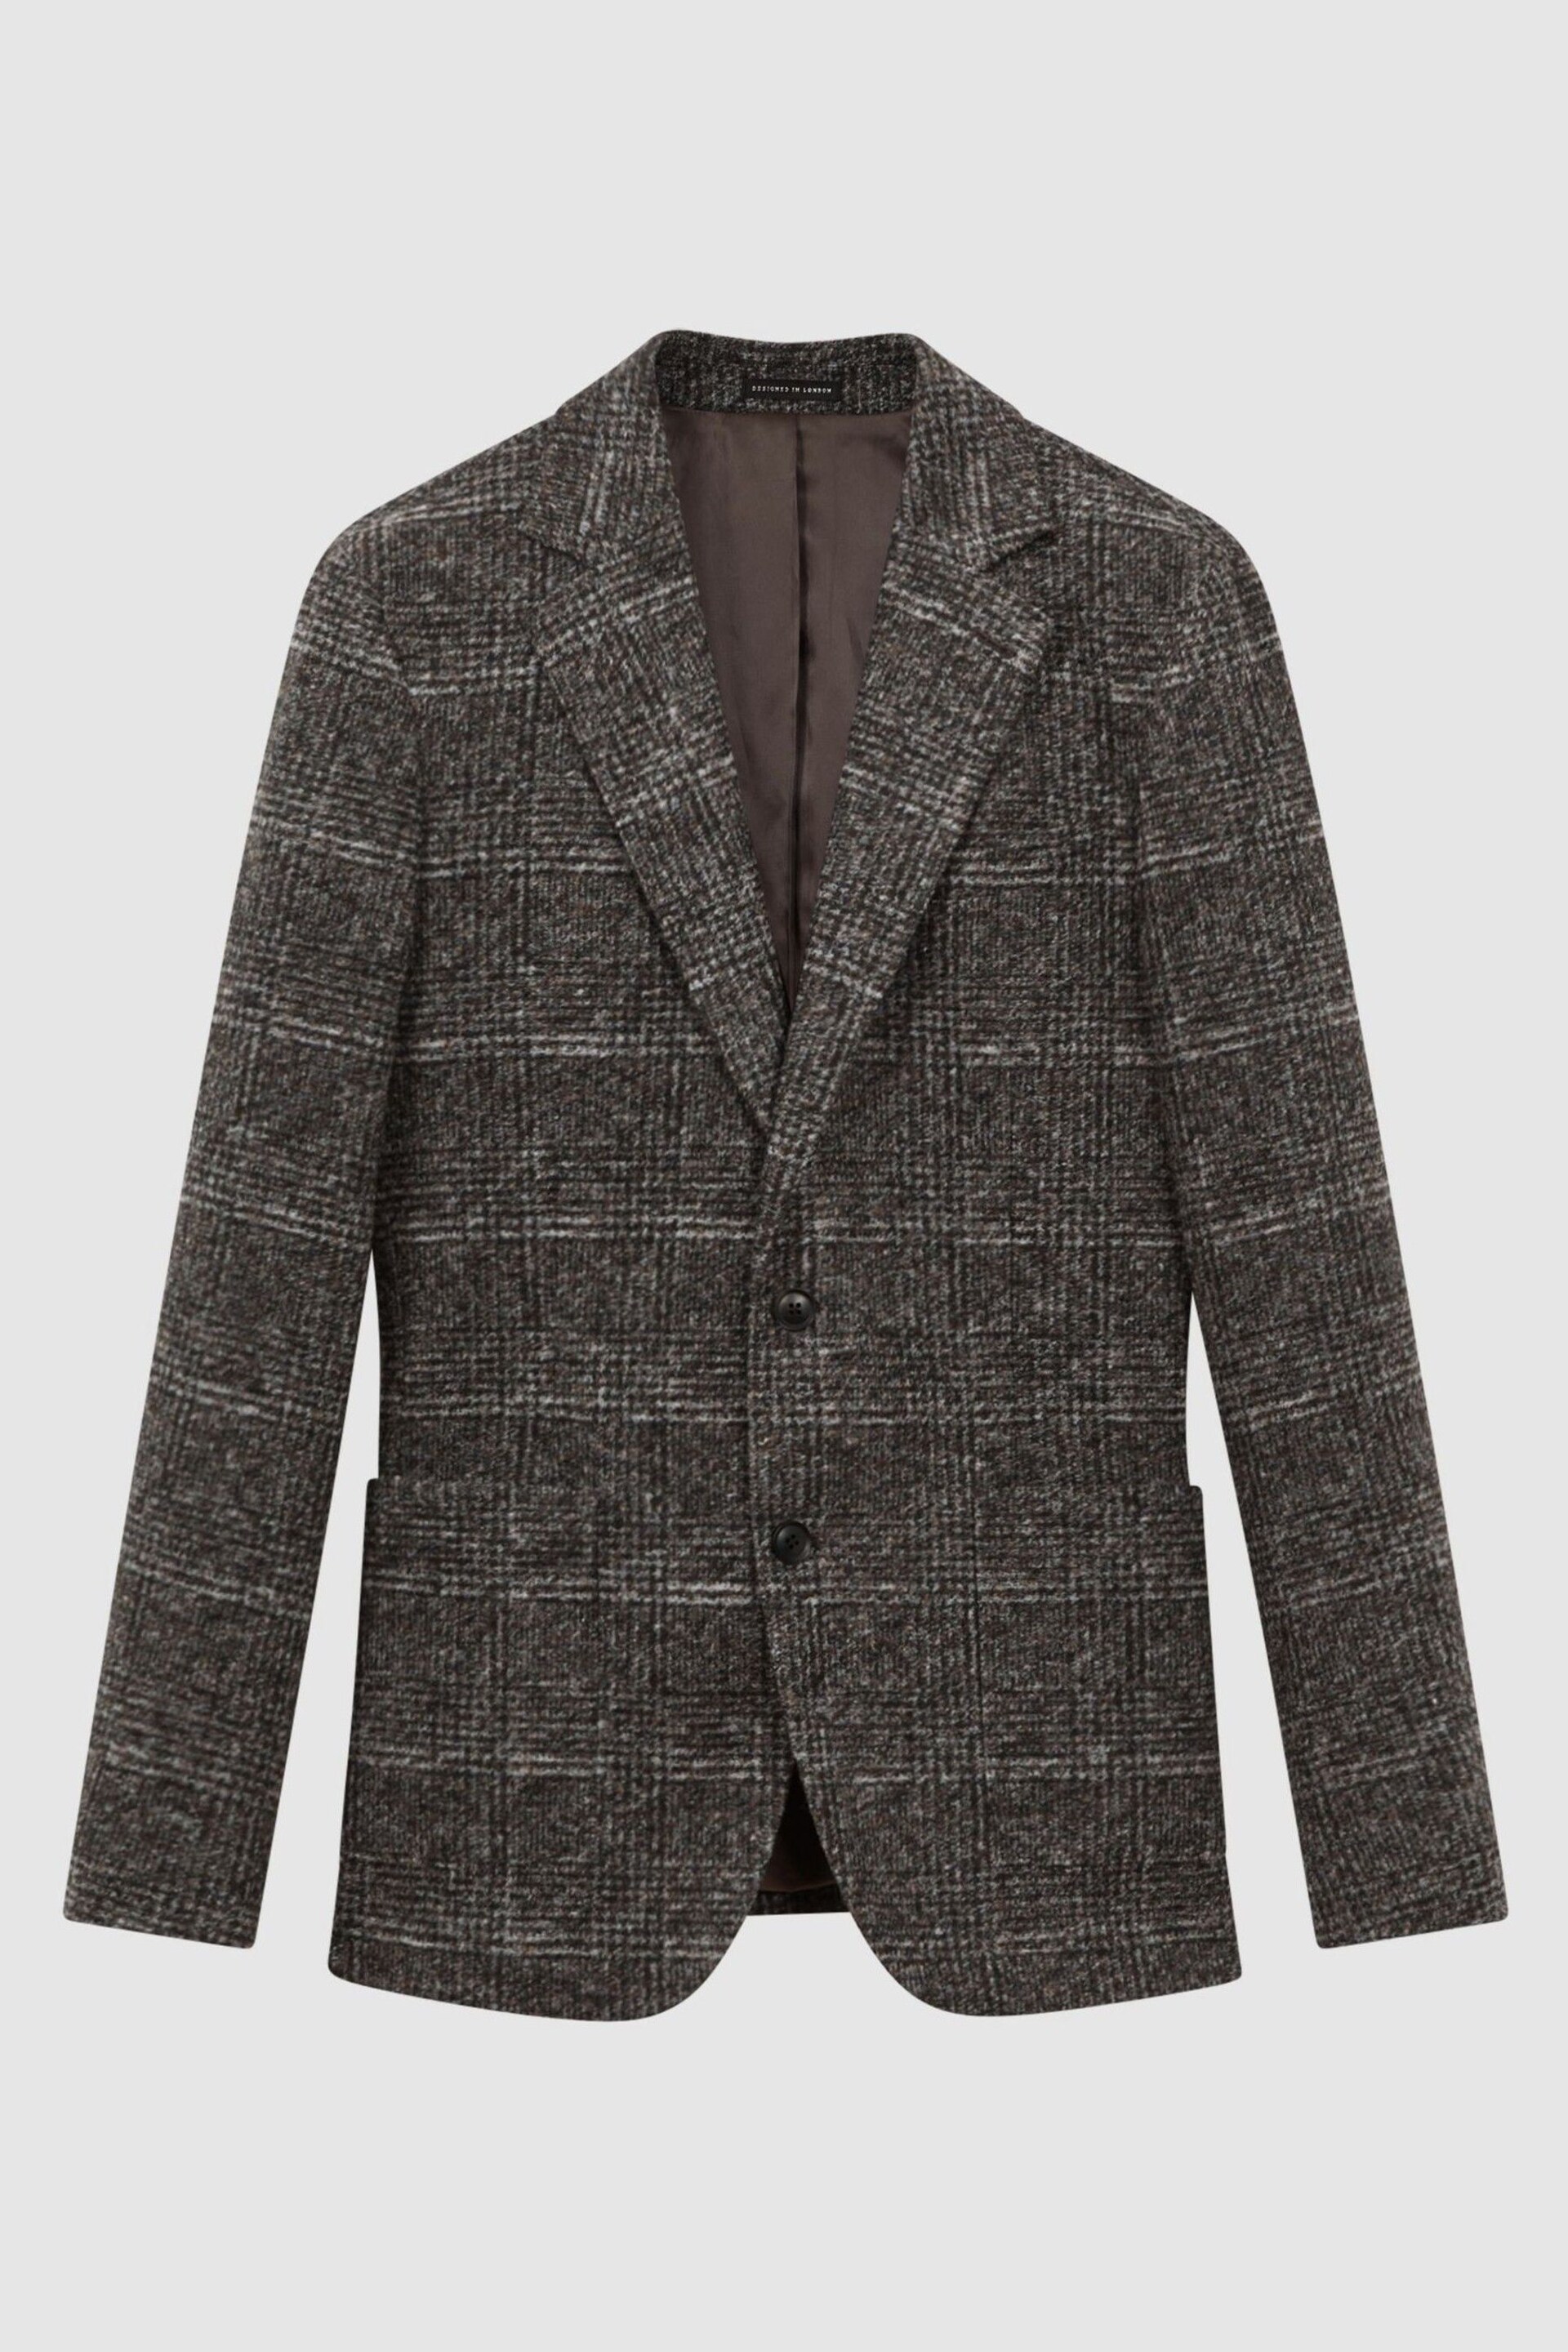 Reiss Charcoal Box Slim Fit Wool Blend Checked Single Breasted Blazer - Image 2 of 7